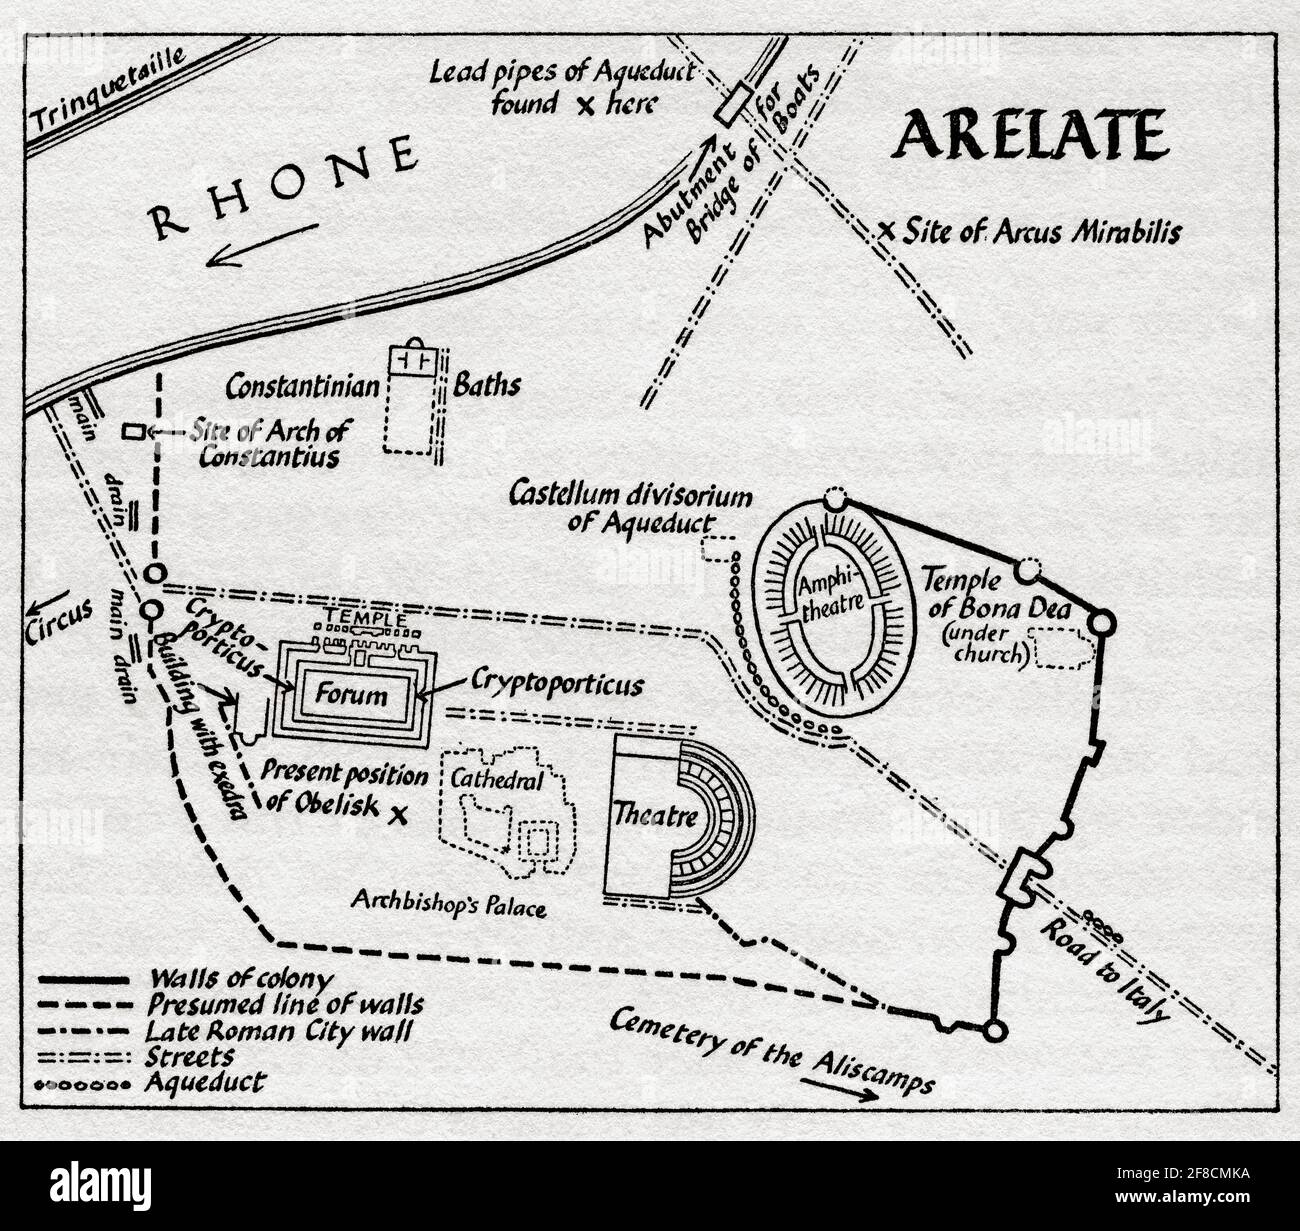 Layout of the ancient Gallo-Roman town Arelate (Arles), showing the Forum, Theatre and Temple of Bona Dea.  After an illustration by Edgar Holloway. Stock Photo